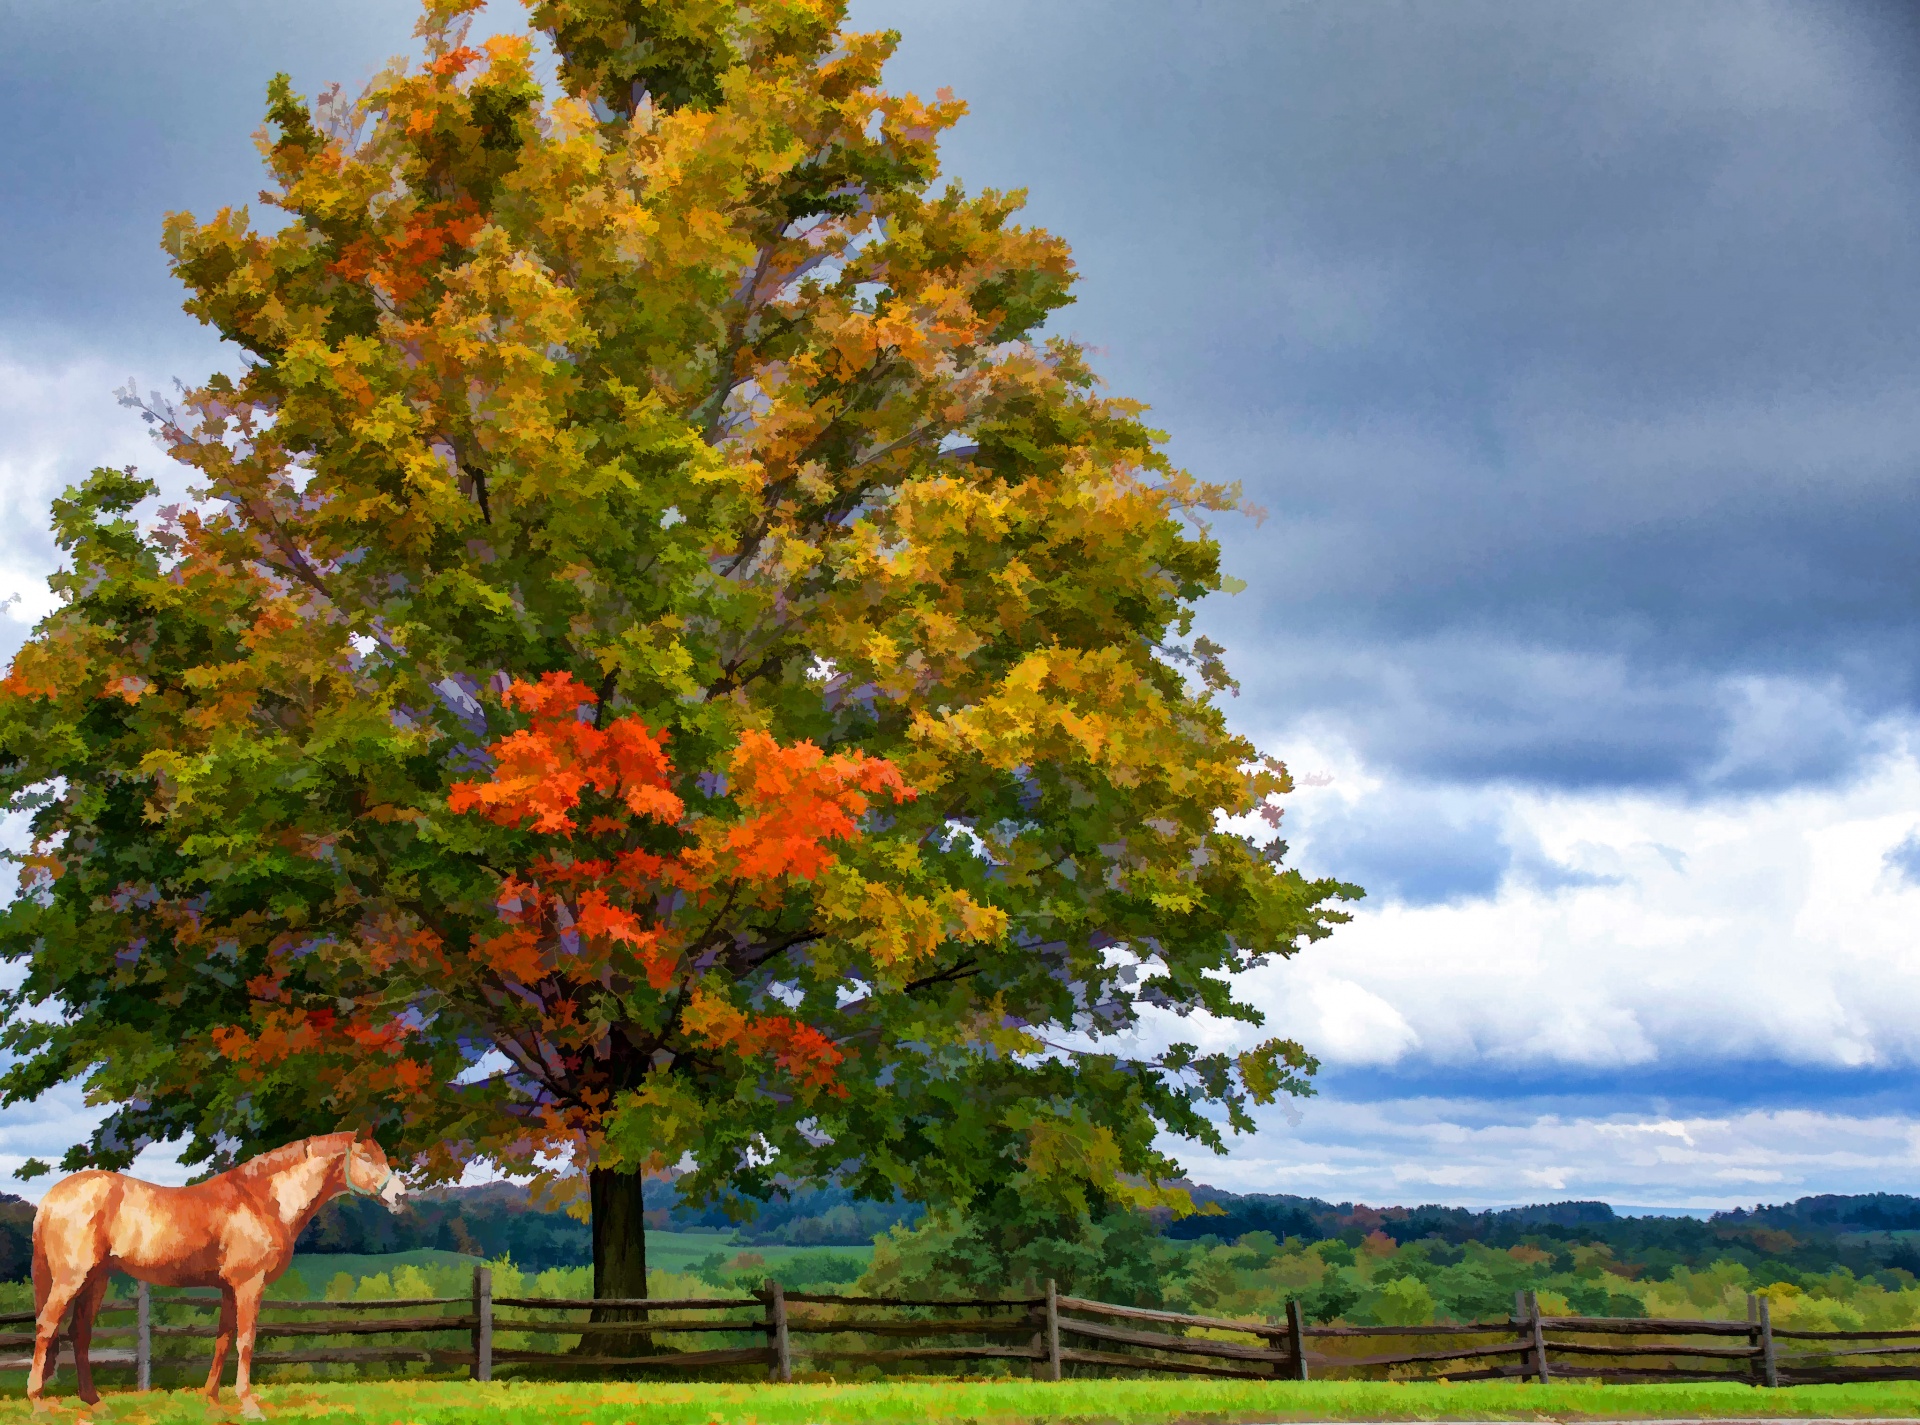 horse in front of a huge tree changing colors in the countryside